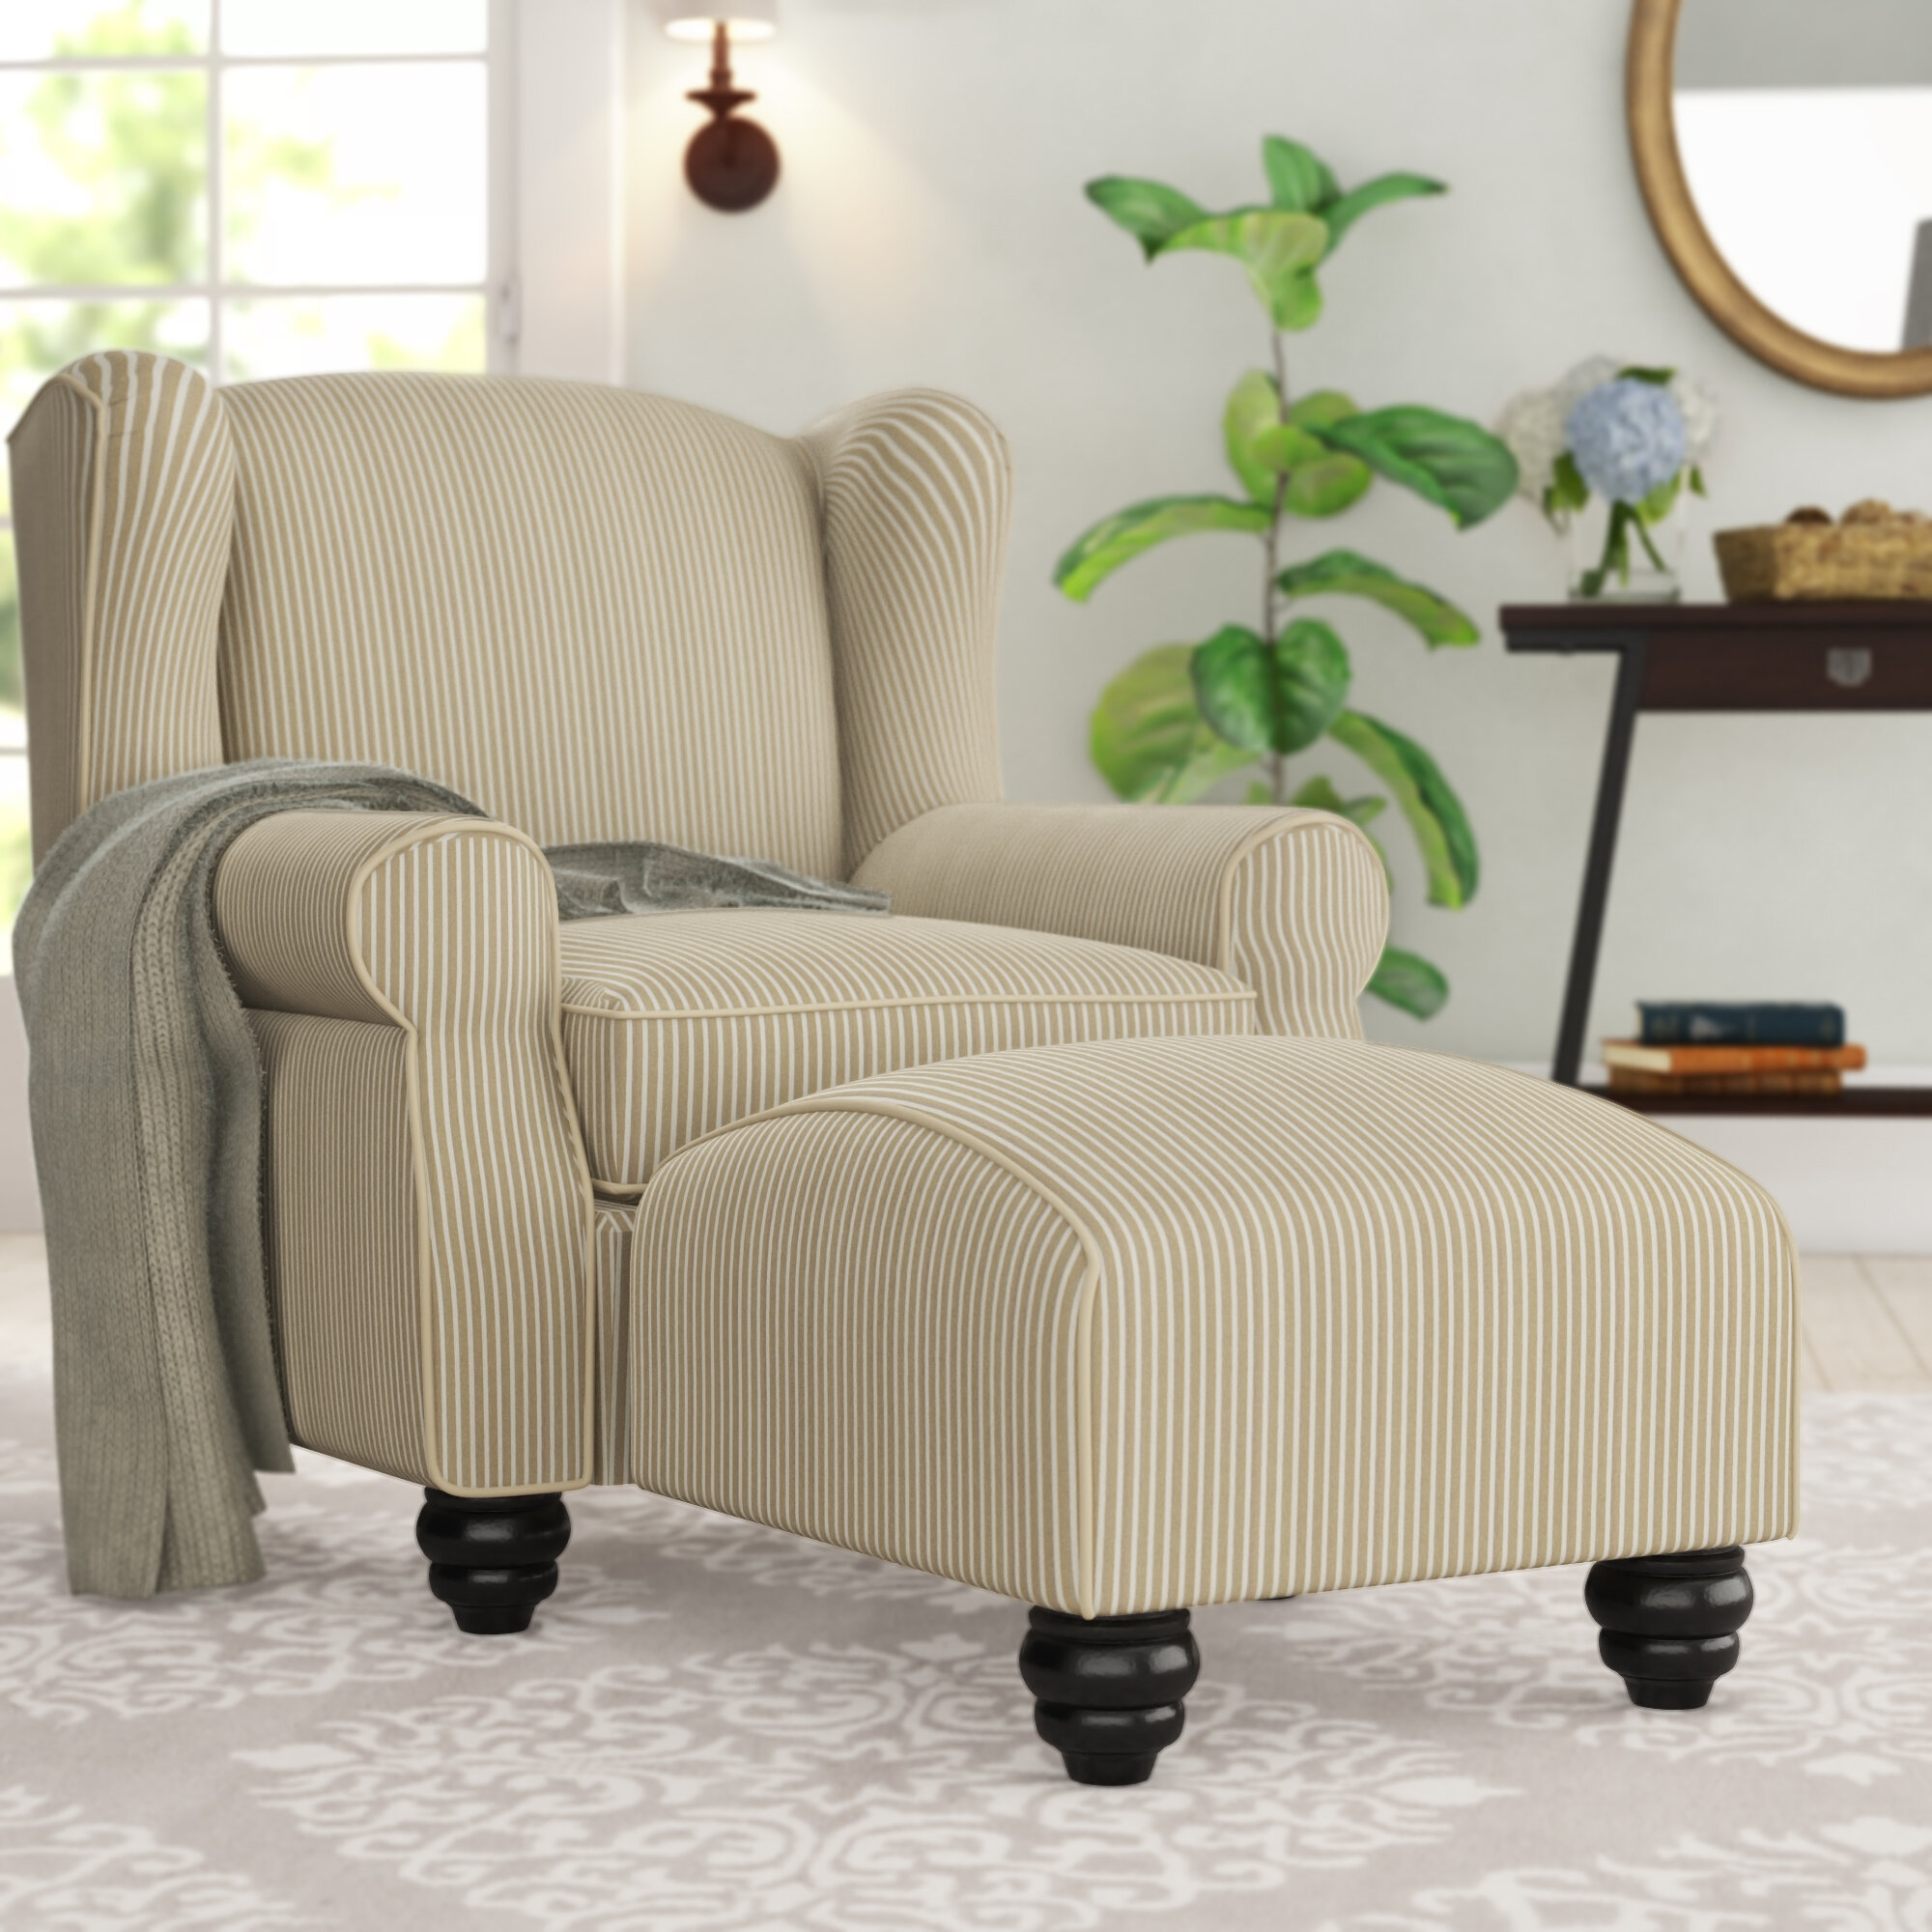 Darby Home Co Brougham 3354 Wide Wingback Chair And Ottoman Reviews Wayfair